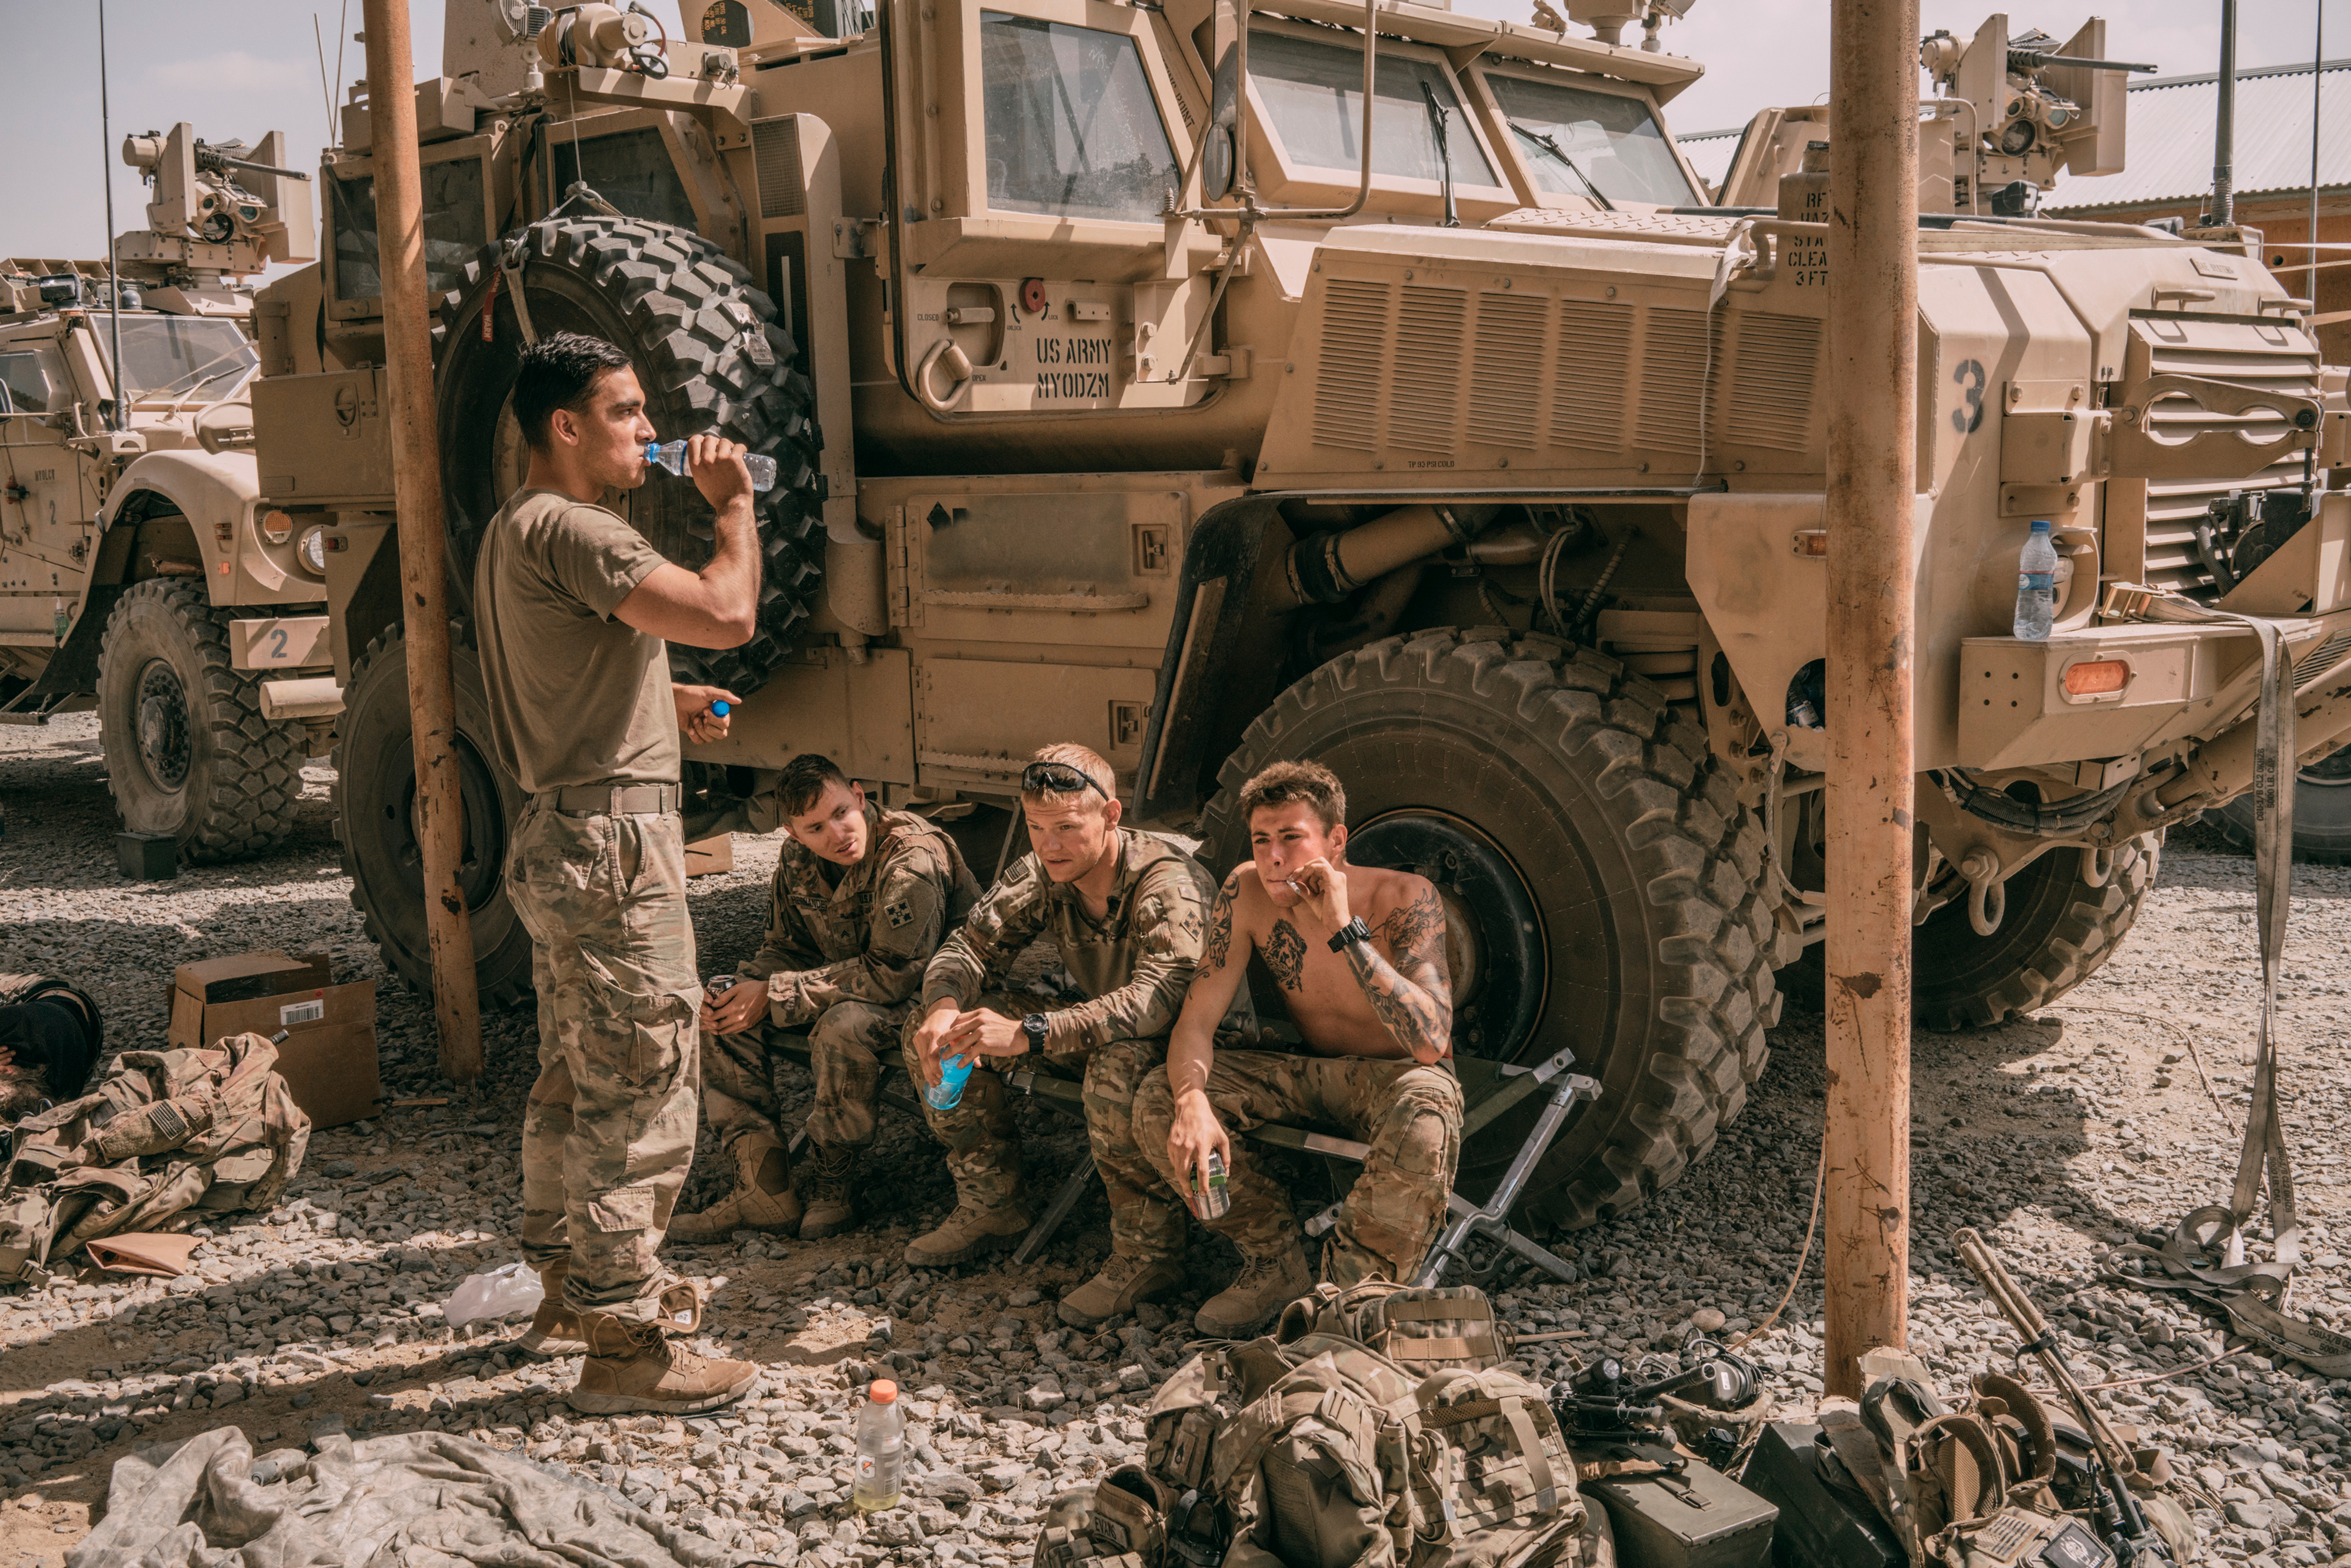 Americans at a military outpost inside Ghazni on Aug. 16, 2018, after the U.S. helped Afghan forces retake the city from the Taliban. (Emanuele Satolli for TIME)